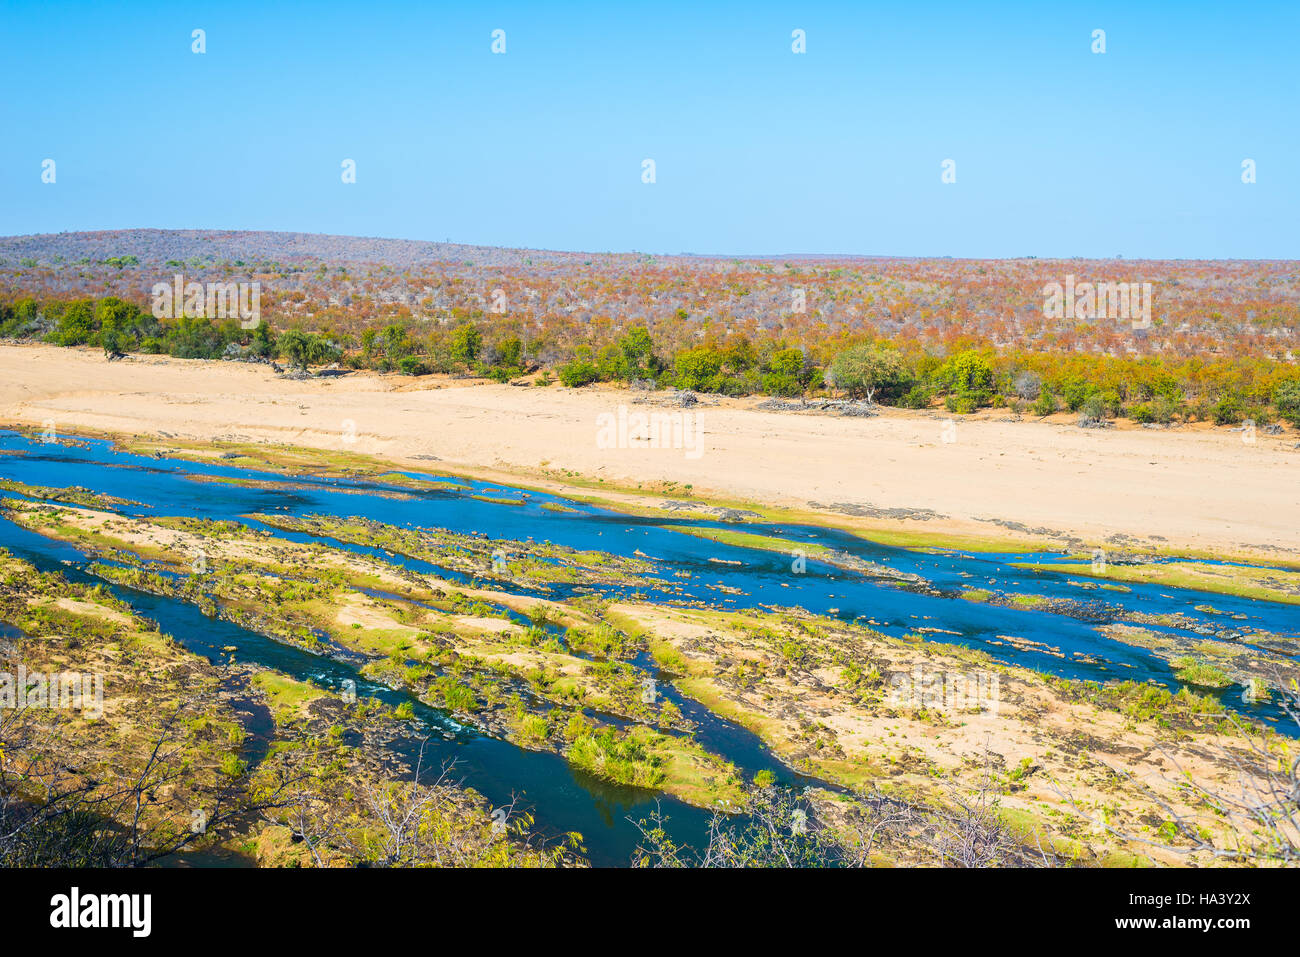 Olifants river, scenic and colorful landscape with wildlife in the Kruger National Park, famous travel destination in South Africa. Clear blue sky. Stock Photo